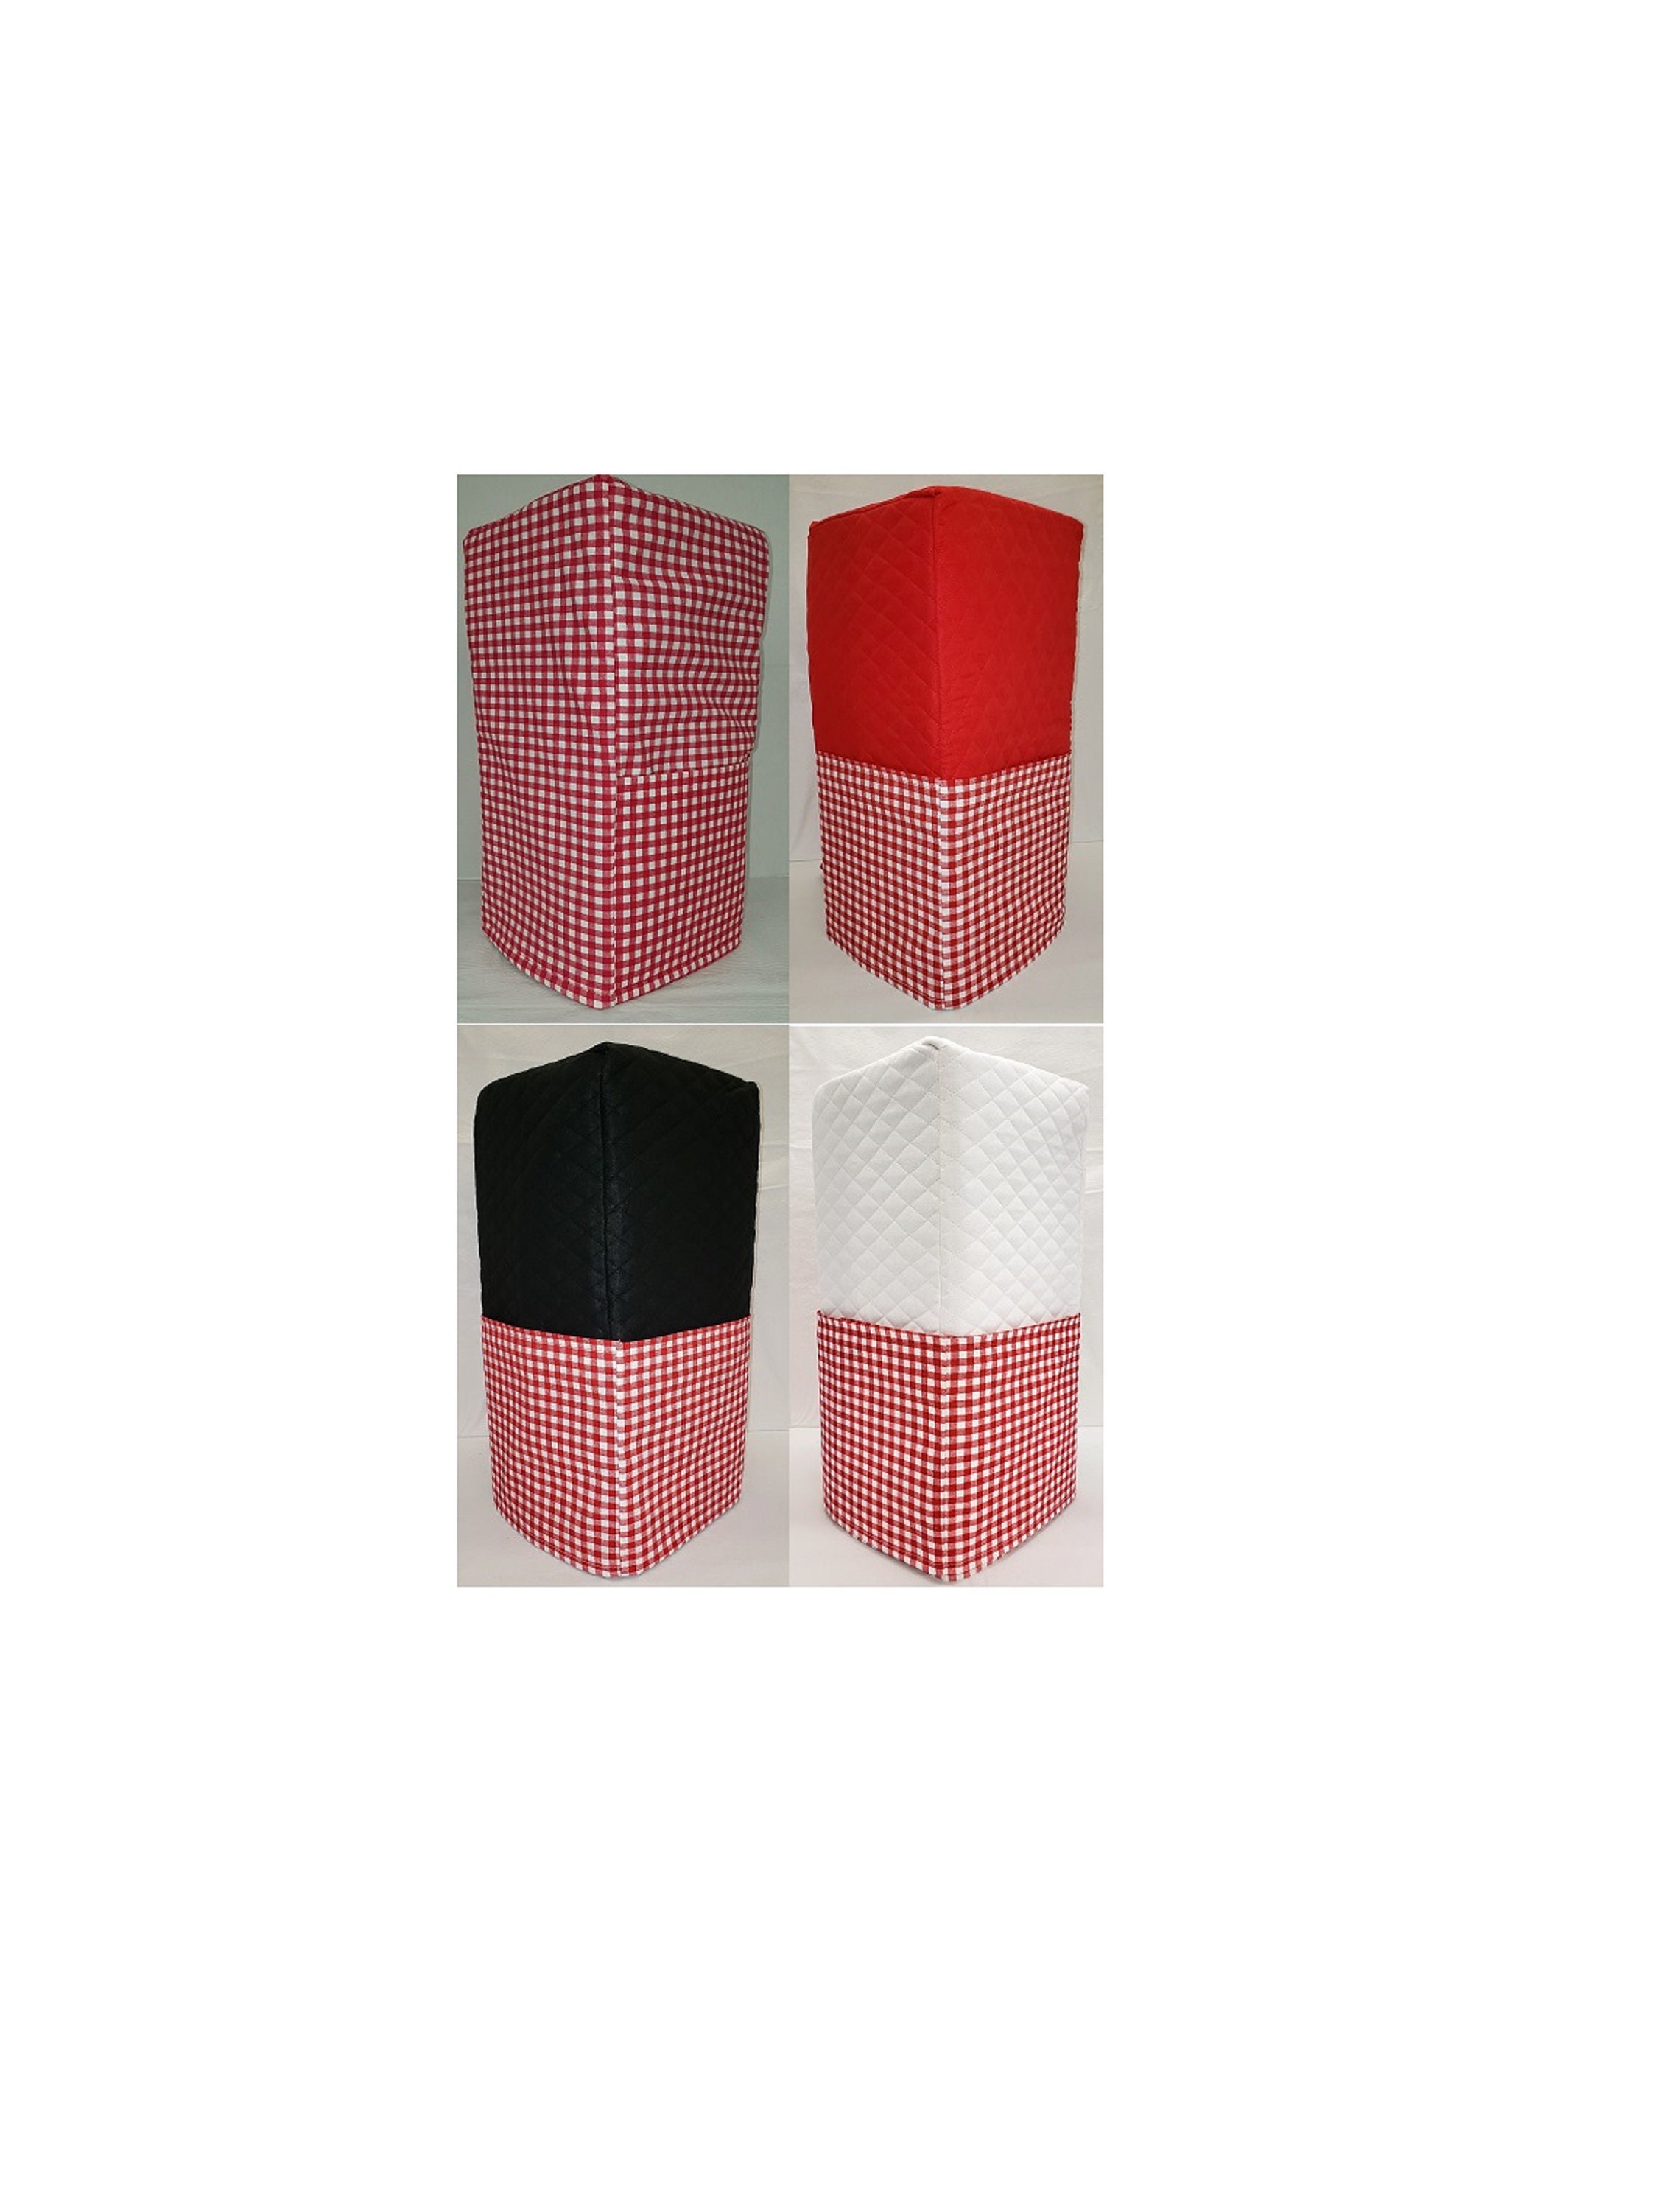 Red & White Checked Blender Cover | Sizing Chart Located in Item Details